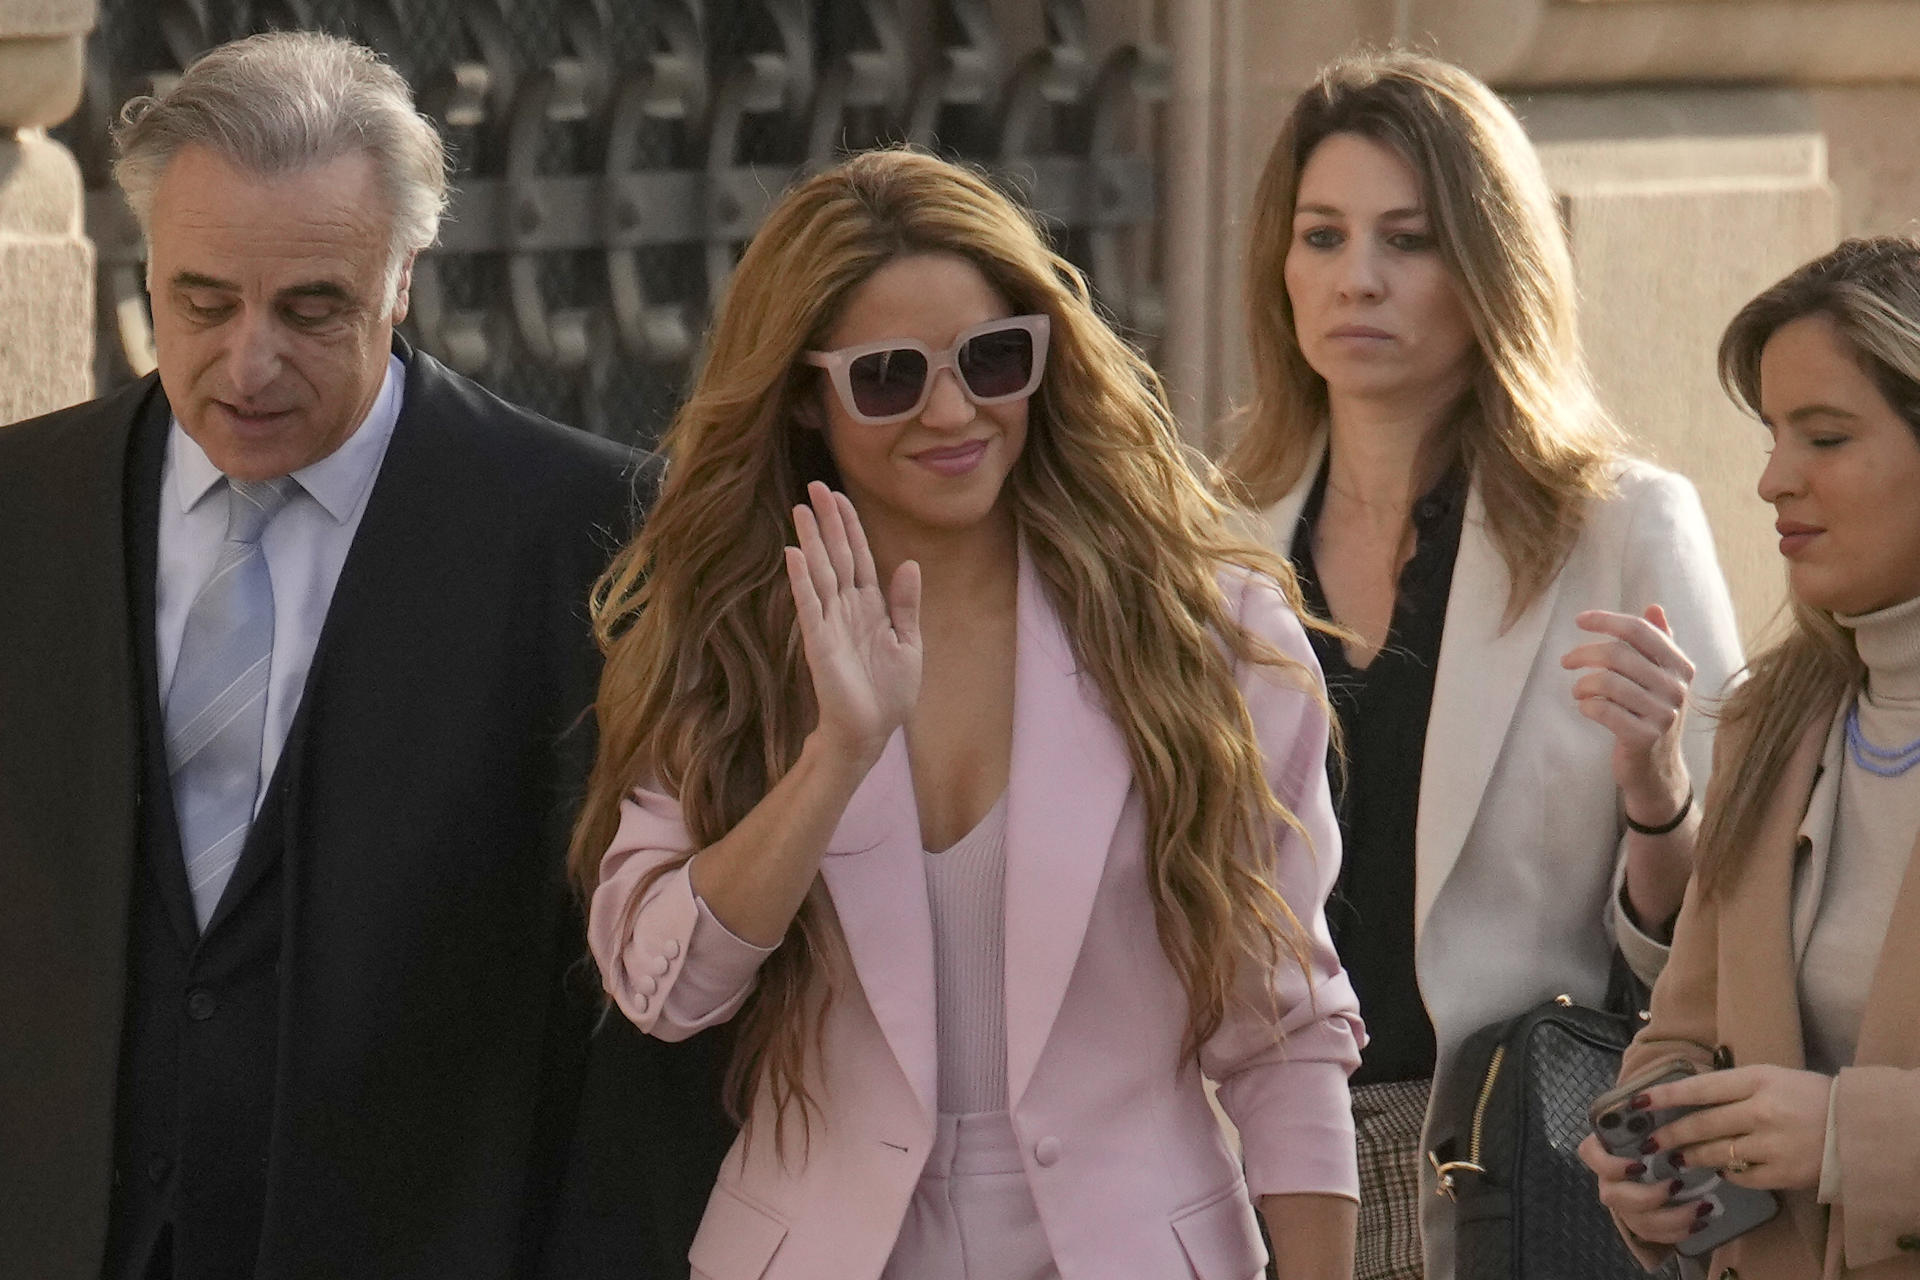 Colombian singer Shakira, accopanied by members of her defense team (Barcelona's firm Molins Defensa Penal), arrives at Barcelona Provincial Court on the first day of her trial for allegedly defrauding Spanish tax officials of 14.5 million euro in taxes between 2012 and 2014, in Barcelona city, Catalonia region, north-eastern Spain, 20 November 2023. Shakira has eventually secured a deal with Spanish prosecutors which means she avoids spending up to eight years in jail in exchange for paying a millionaire fine. EFE/ Quique García